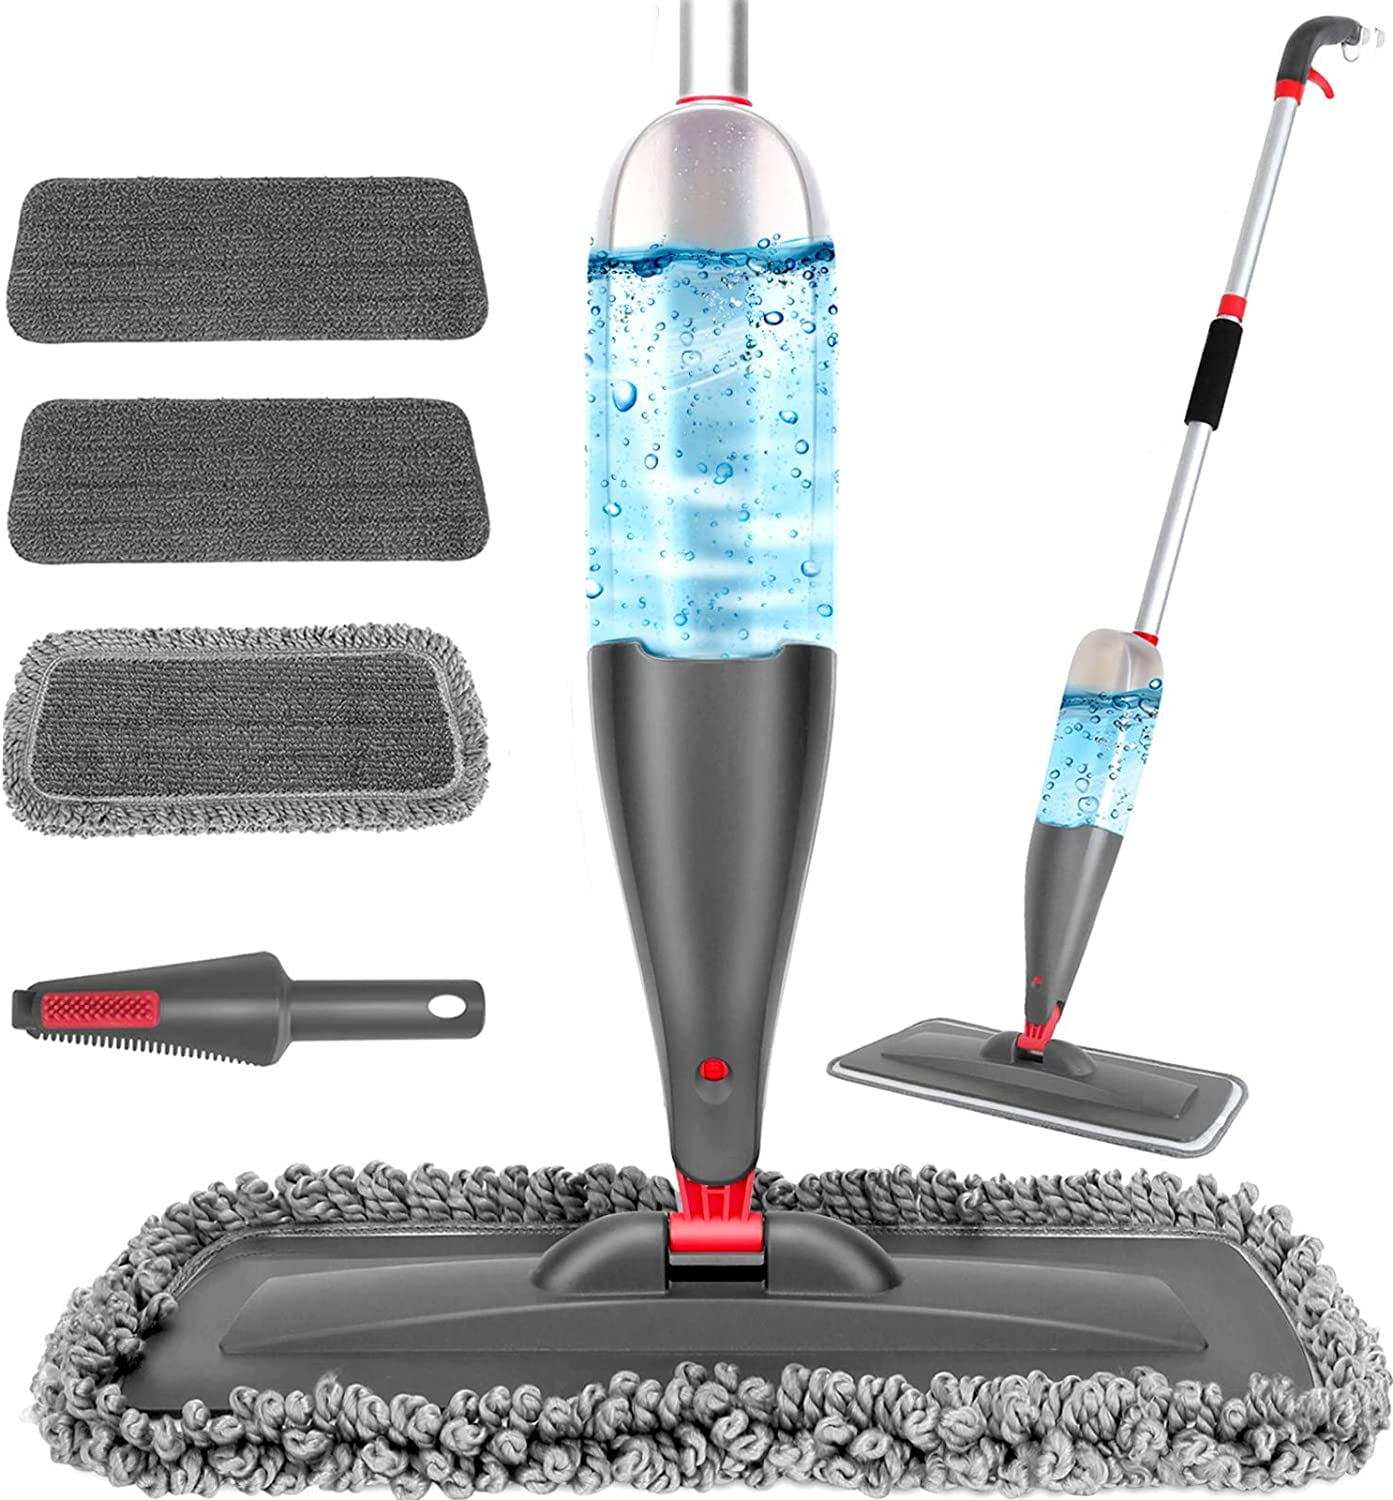 Spray Mop for Floor Cleaning with 3pcs Washable Pads - Wet Dry Microfiber  Mop with 800 ml Refillable Bottle for Kitchen Wood Floor Hardwood Laminate  Ceramic Tiles Floor Dust Cleaning Gray 3